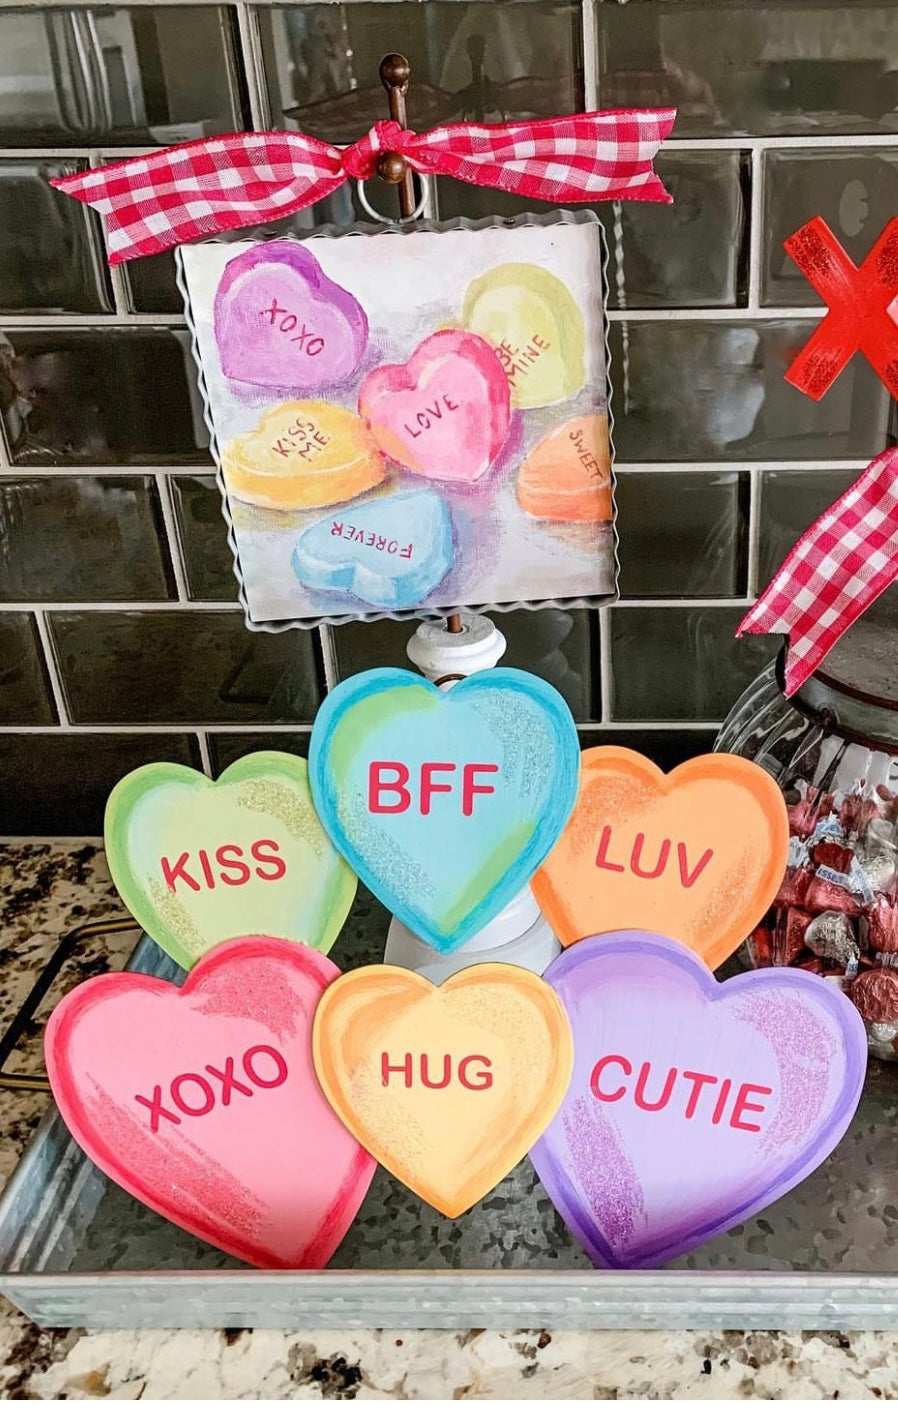 Fun Pile of Candy Hearts Outdoor or Indoor Conversation Hearts